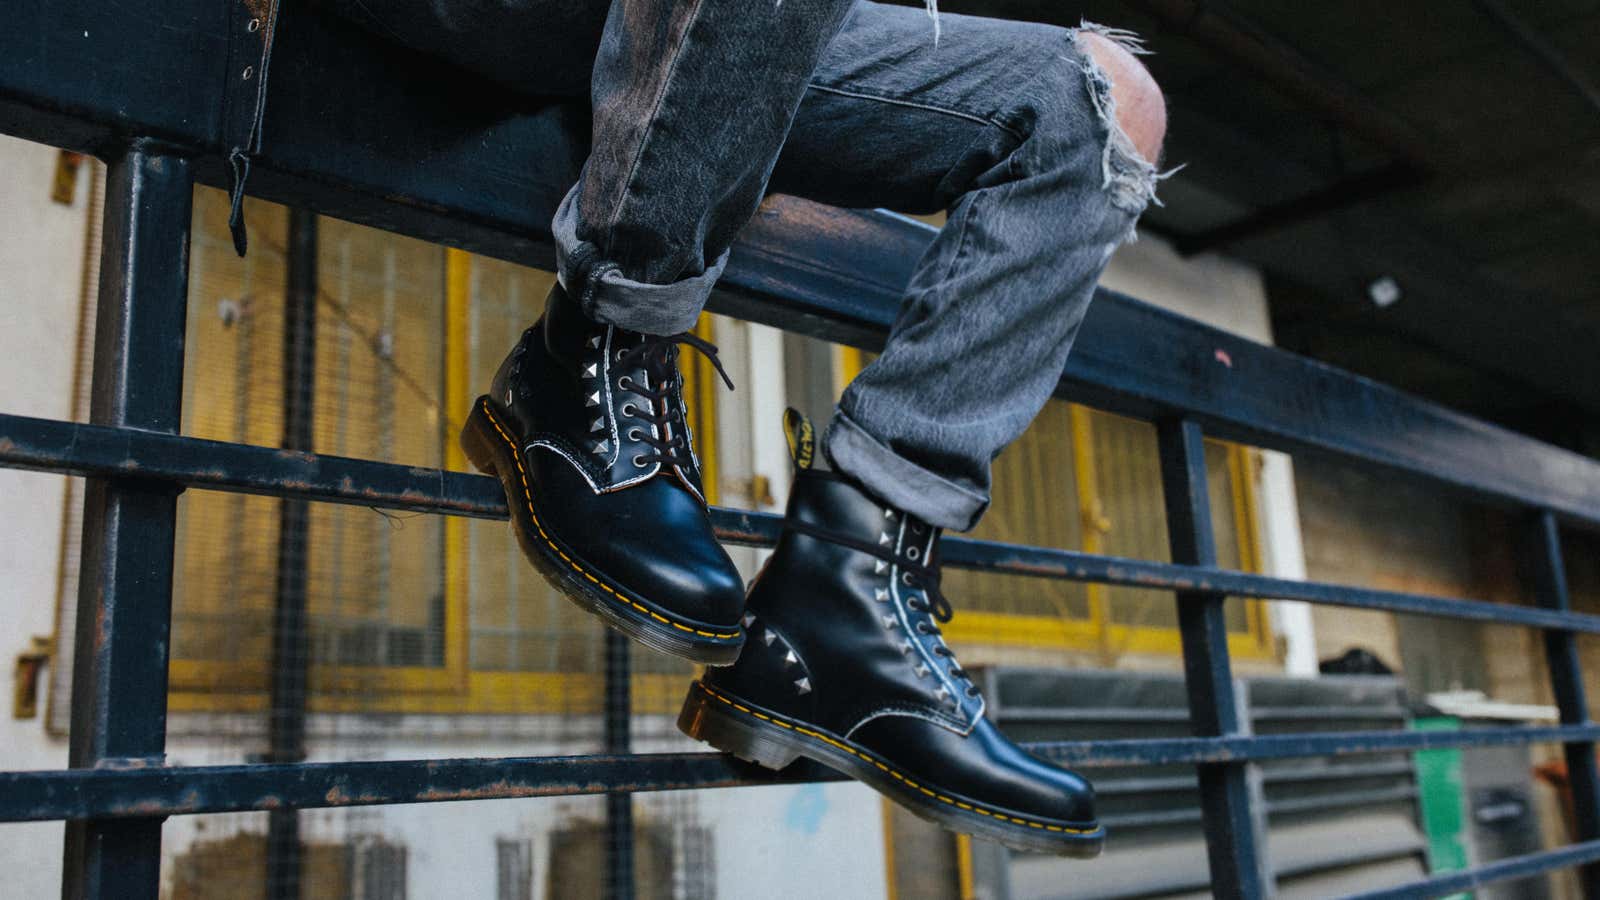 Doc Martens’s vegan boot business is thriving